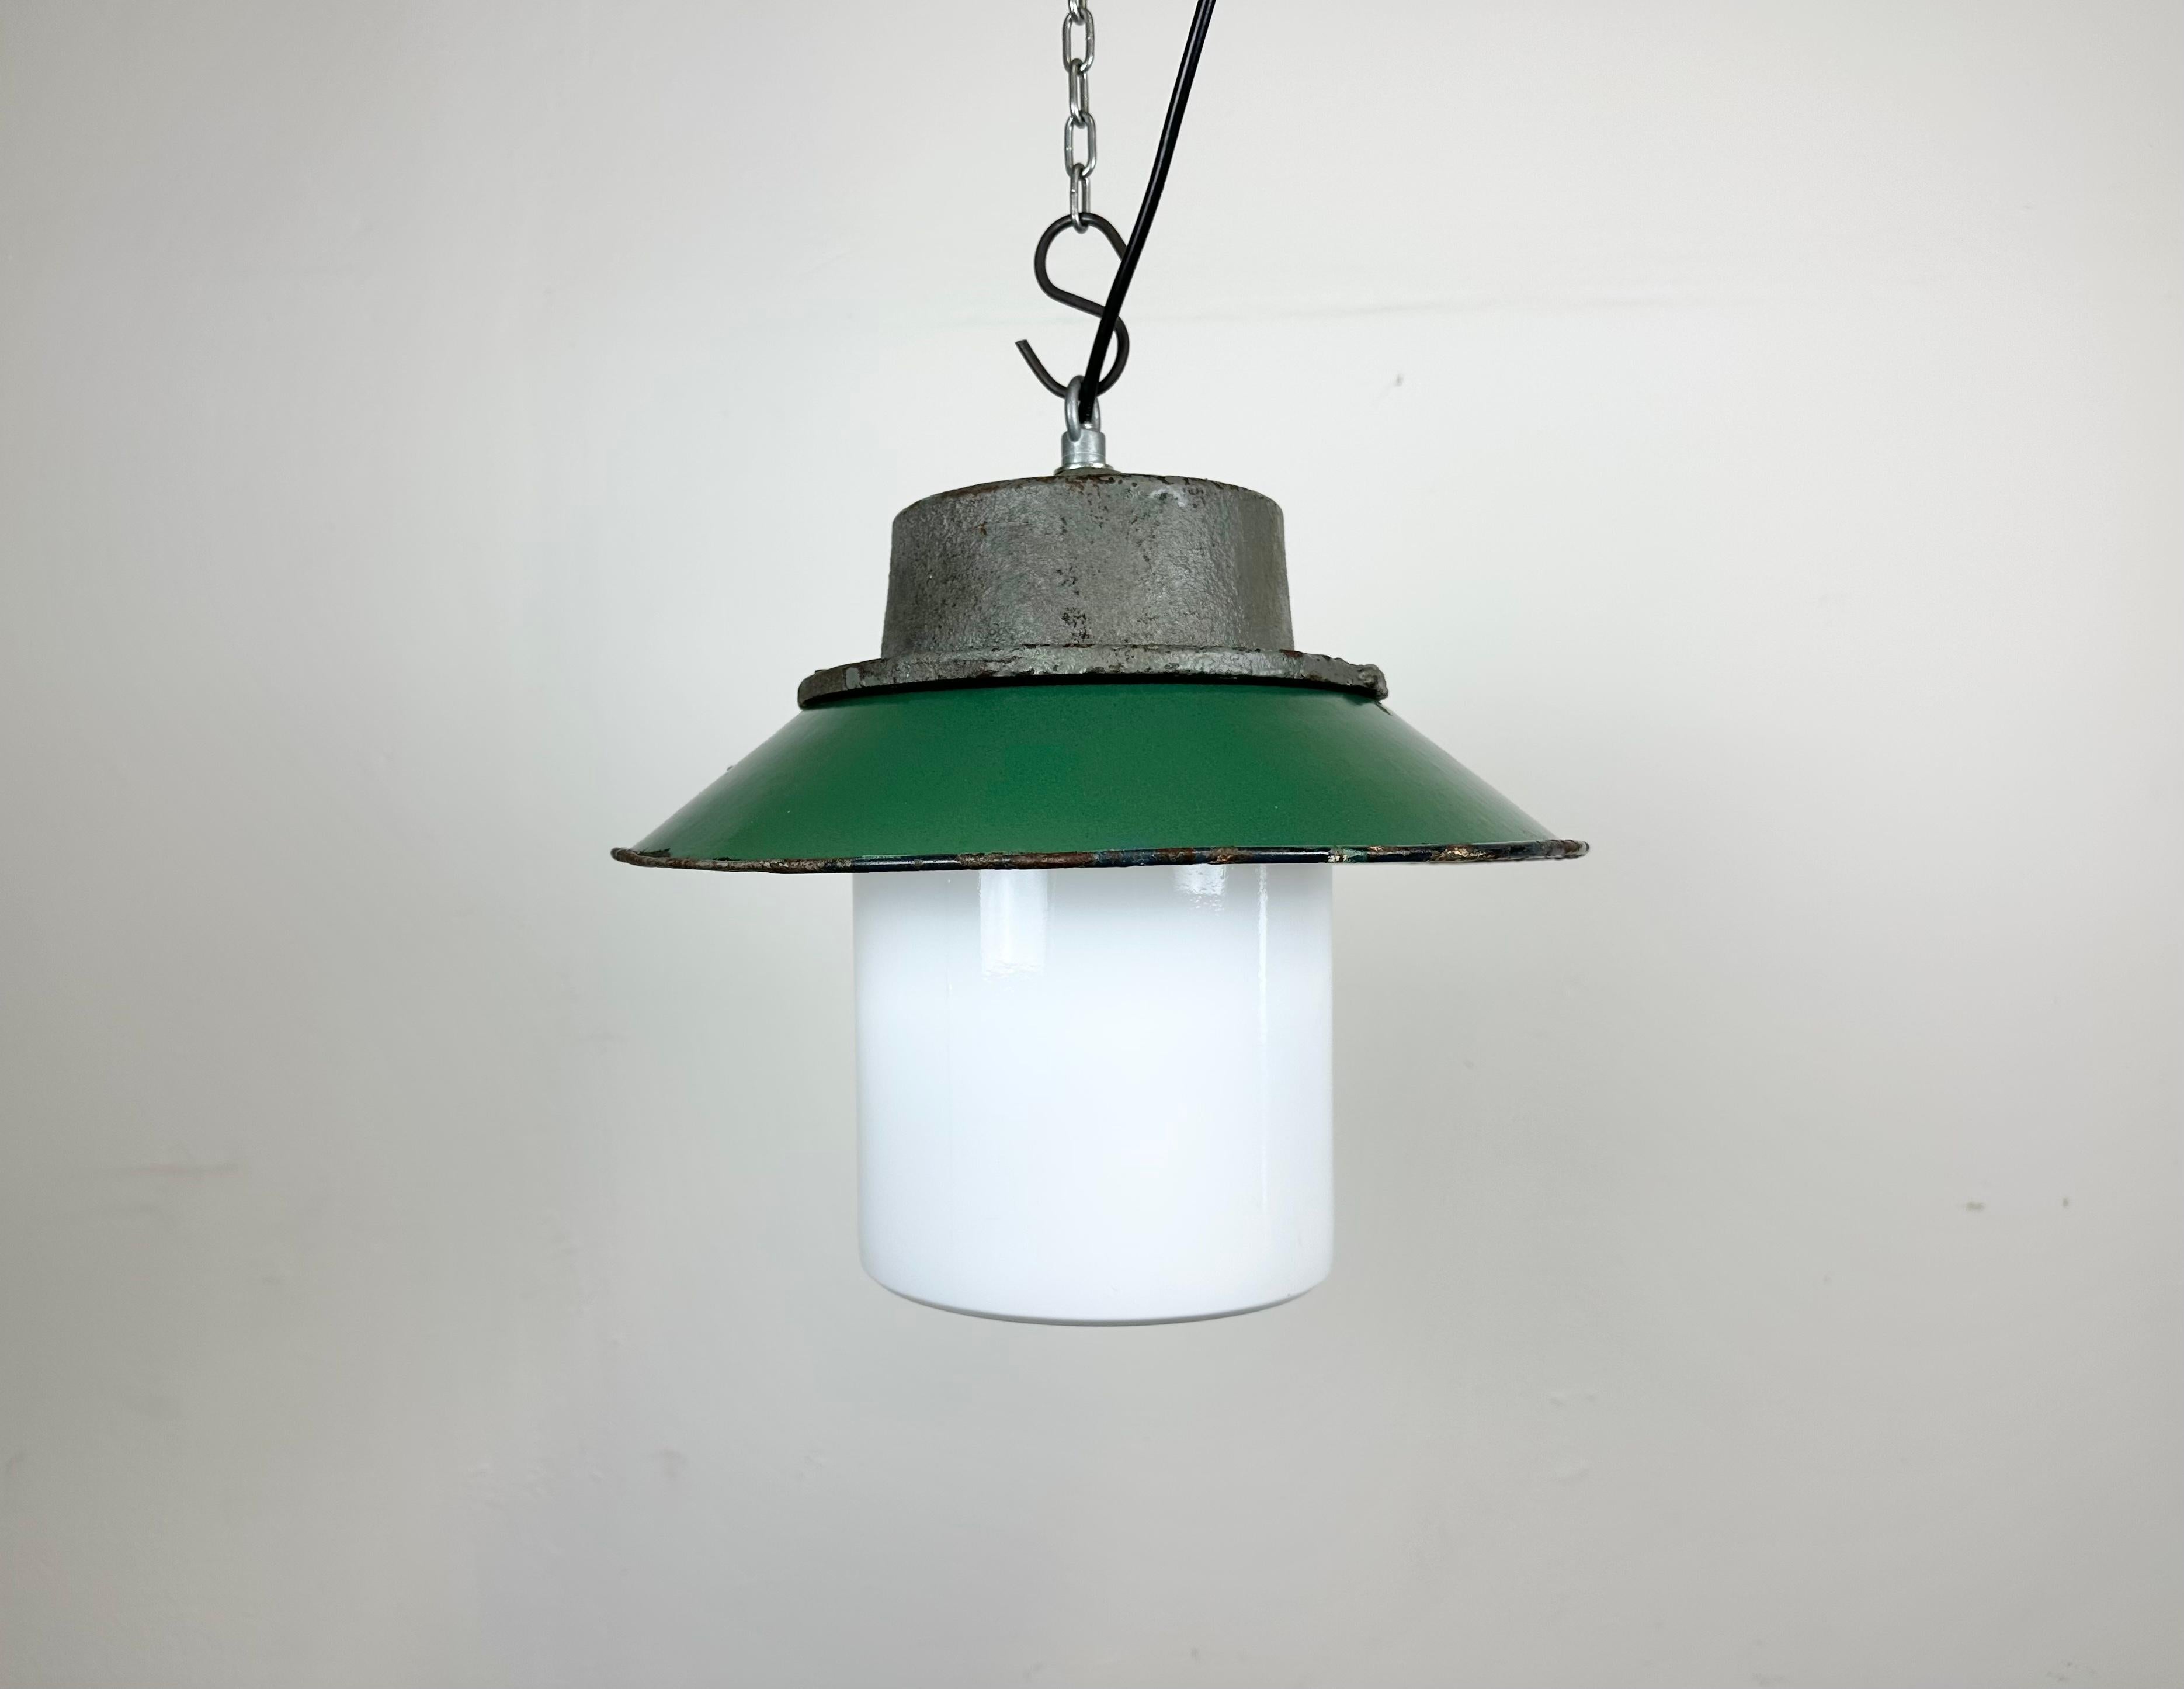 Industrial hanging lamp manufactured in Poland during the 1960s. It features a green enamel shade with white enamel interior, a grey cast iron top and a milk glass cover. The porcelain socket requires E 27/ E26 lightbulbs .New wire. The weight of